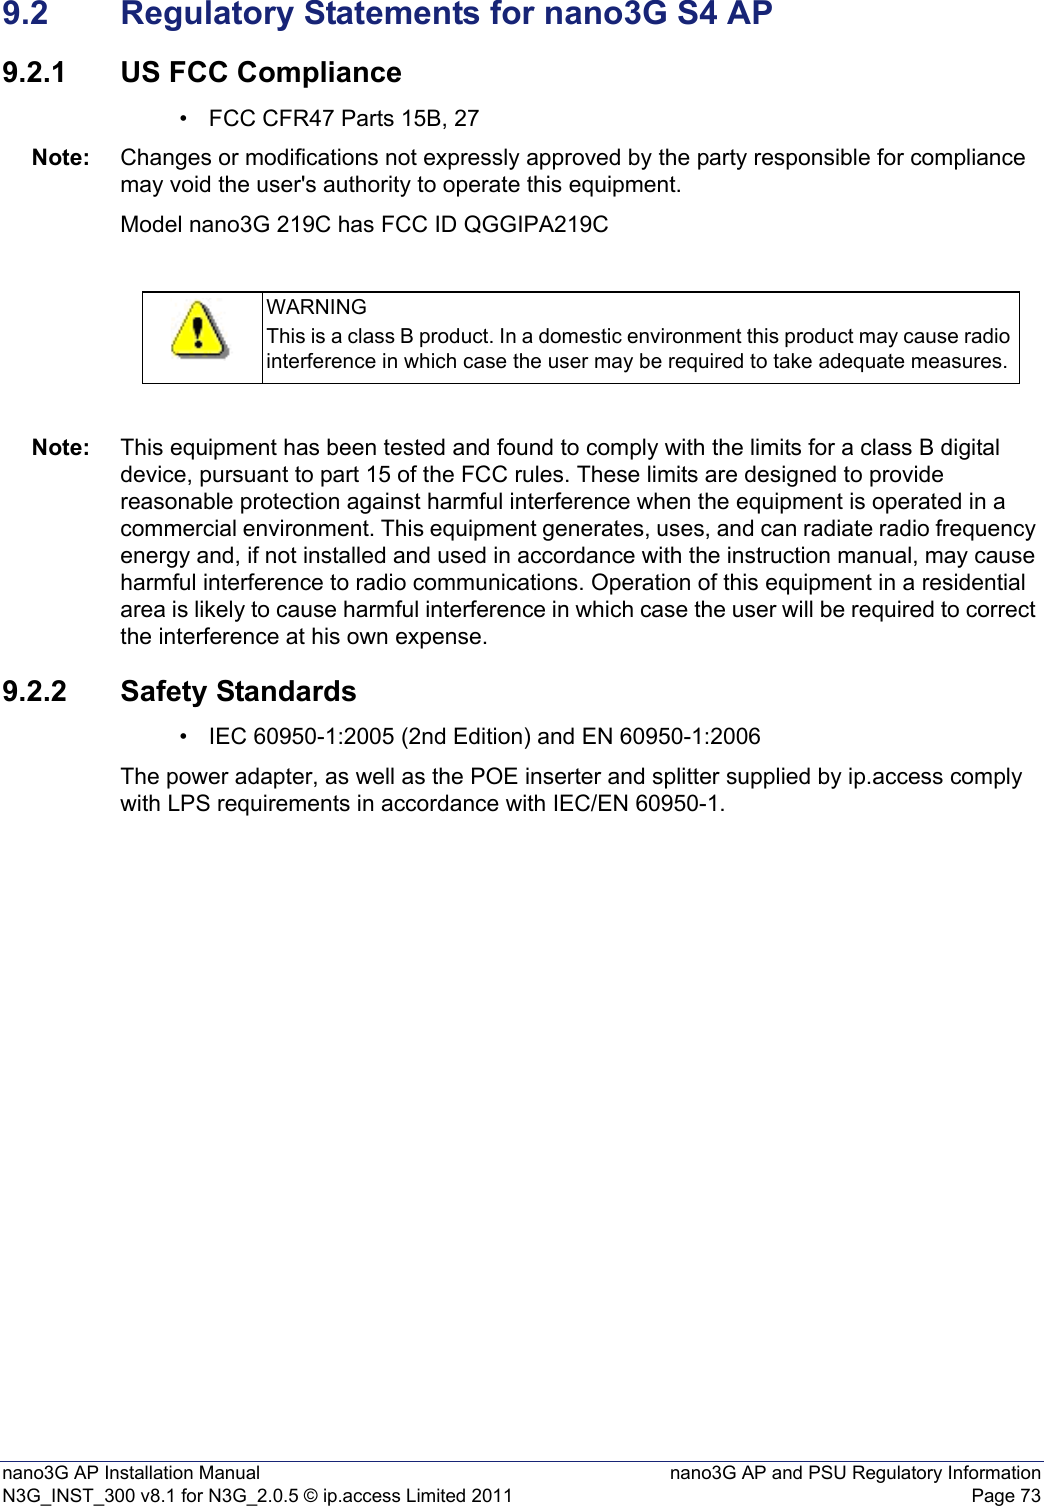 nano3G AP Installation Manual nano3G AP and PSU Regulatory InformationN3G_INST_300 v8.1 for N3G_2.0.5 © ip.access Limited 2011 Page 739.2 Regulatory Statements for nano3G S4 AP9.2.1 US FCC Compliance• FCC CFR47 Parts 15B, 27Note: Changes or modifications not expressly approved by the party responsible for compliance may void the user&apos;s authority to operate this equipment.Model nano3G 219C has FCC ID QGGIPA219CNote: This equipment has been tested and found to comply with the limits for a class B digital device, pursuant to part 15 of the FCC rules. These limits are designed to provide reasonable protection against harmful interference when the equipment is operated in a commercial environment. This equipment generates, uses, and can radiate radio frequency energy and, if not installed and used in accordance with the instruction manual, may cause harmful interference to radio communications. Operation of this equipment in a residential area is likely to cause harmful interference in which case the user will be required to correct the interference at his own expense.9.2.2 Safety Standards• IEC 60950-1:2005 (2nd Edition) and EN 60950-1:2006The power adapter, as well as the POE inserter and splitter supplied by ip.access comply with LPS requirements in accordance with IEC/EN 60950-1.WARNINGThis is a class B product. In a domestic environment this product may cause radio interference in which case the user may be required to take adequate measures.